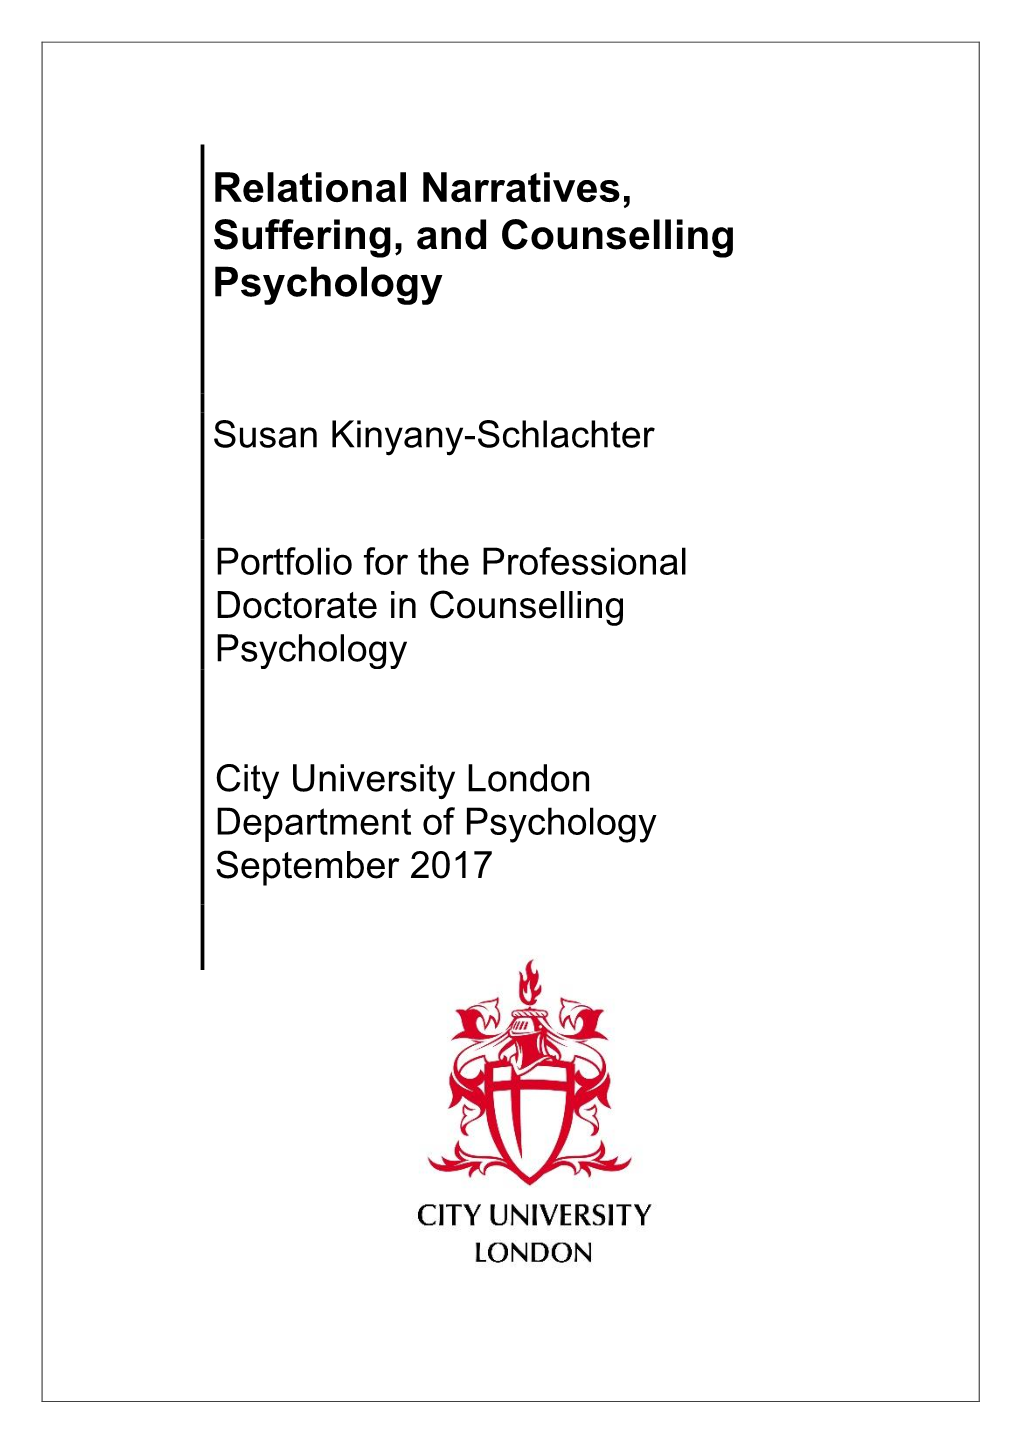 Relational Narratives, Suffering, and Counselling Psychology